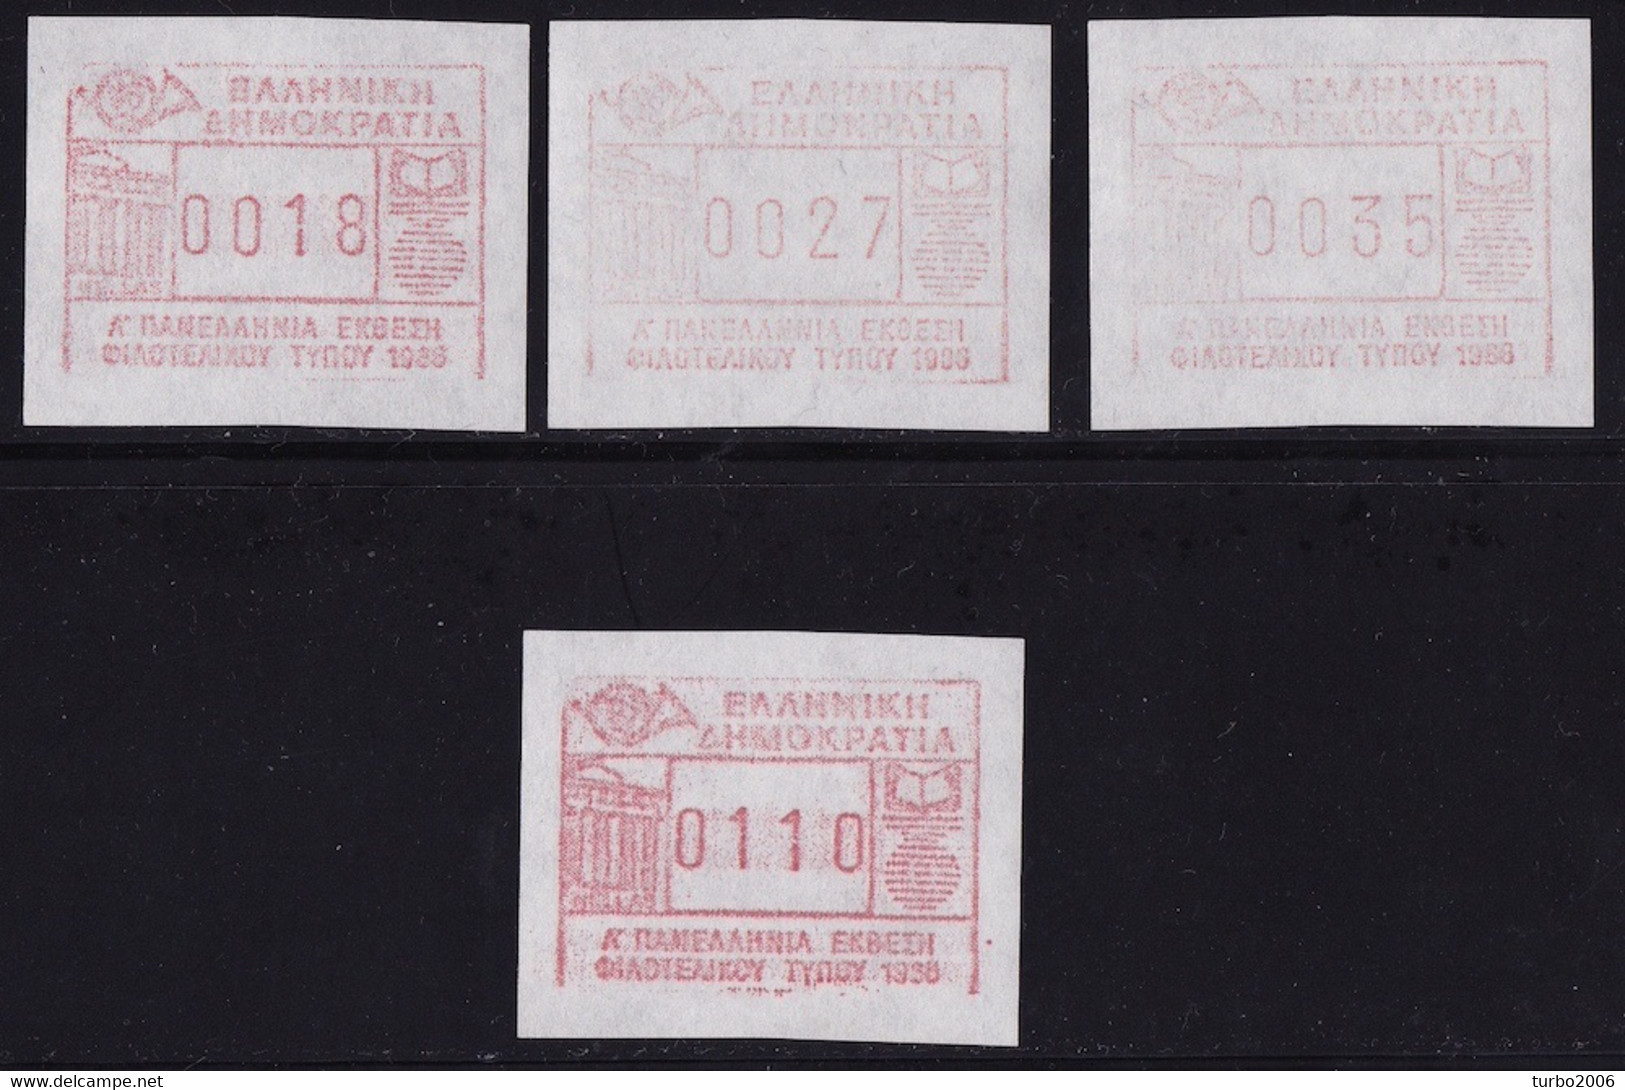 GREECE 1986 FRAMA Stamps For Panhelenic Literature Exhabition Set Of 18-27-35 DR + 110 Dr MNH Hellas M 12 - Automaatzegels [ATM]